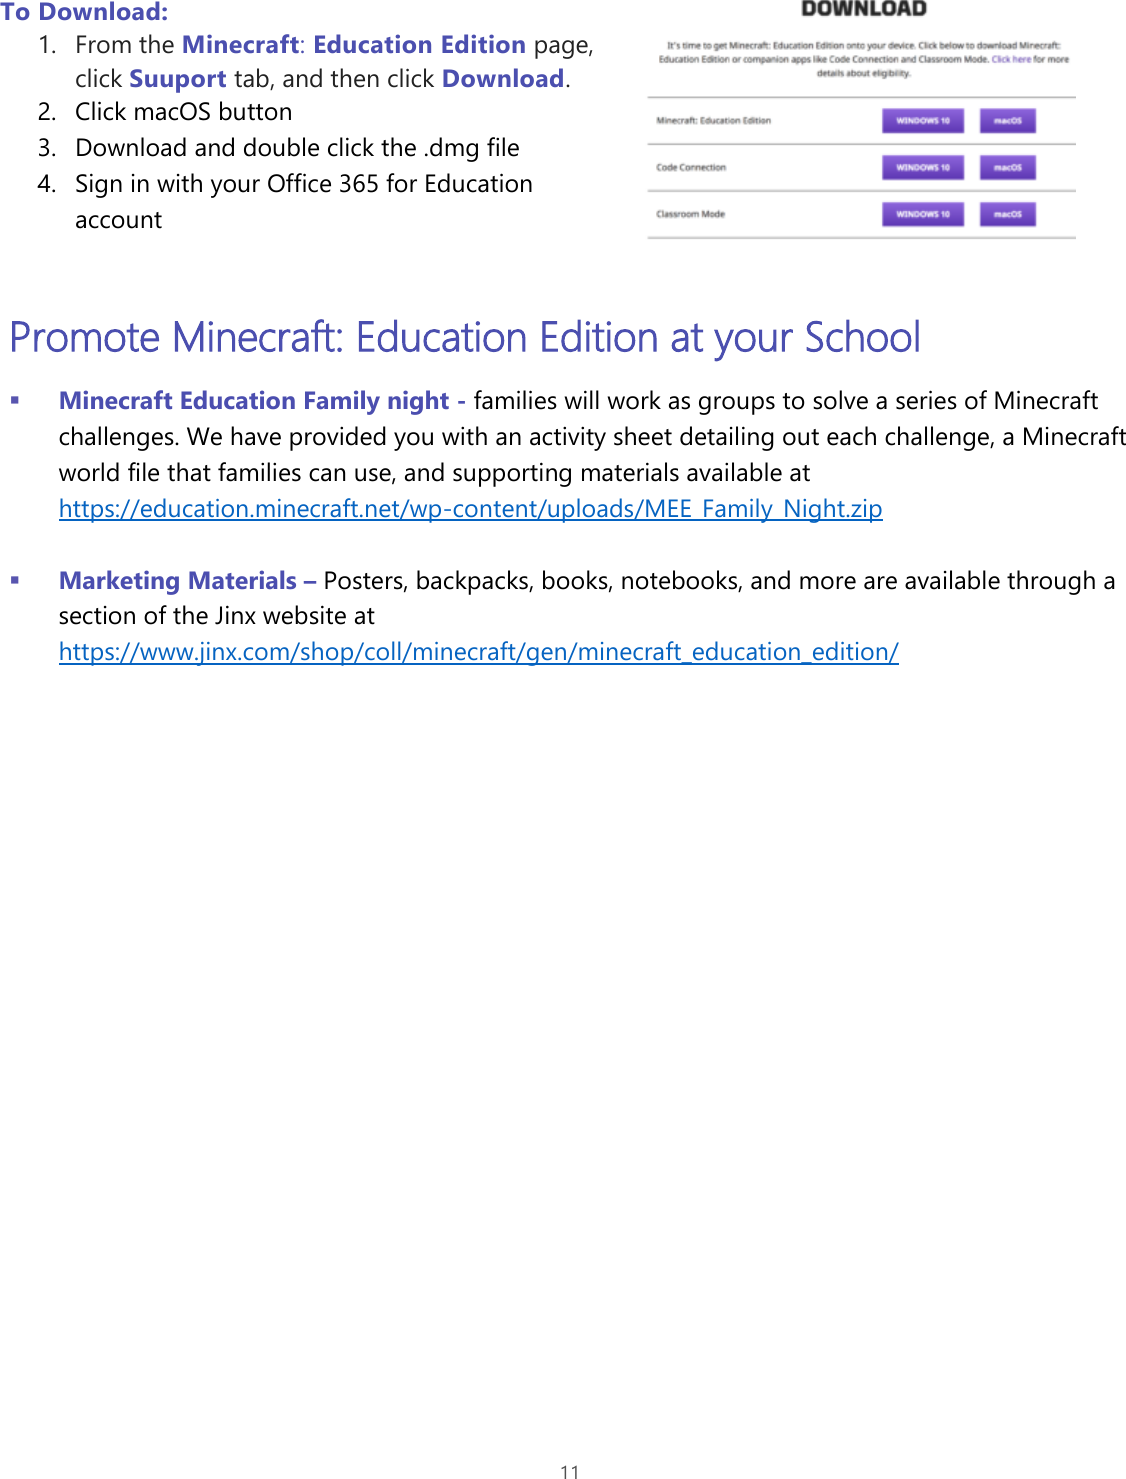 Page 11 of 11 - Microsoft Teams Team Leader Getting Started Guide MEE Educator Deployment